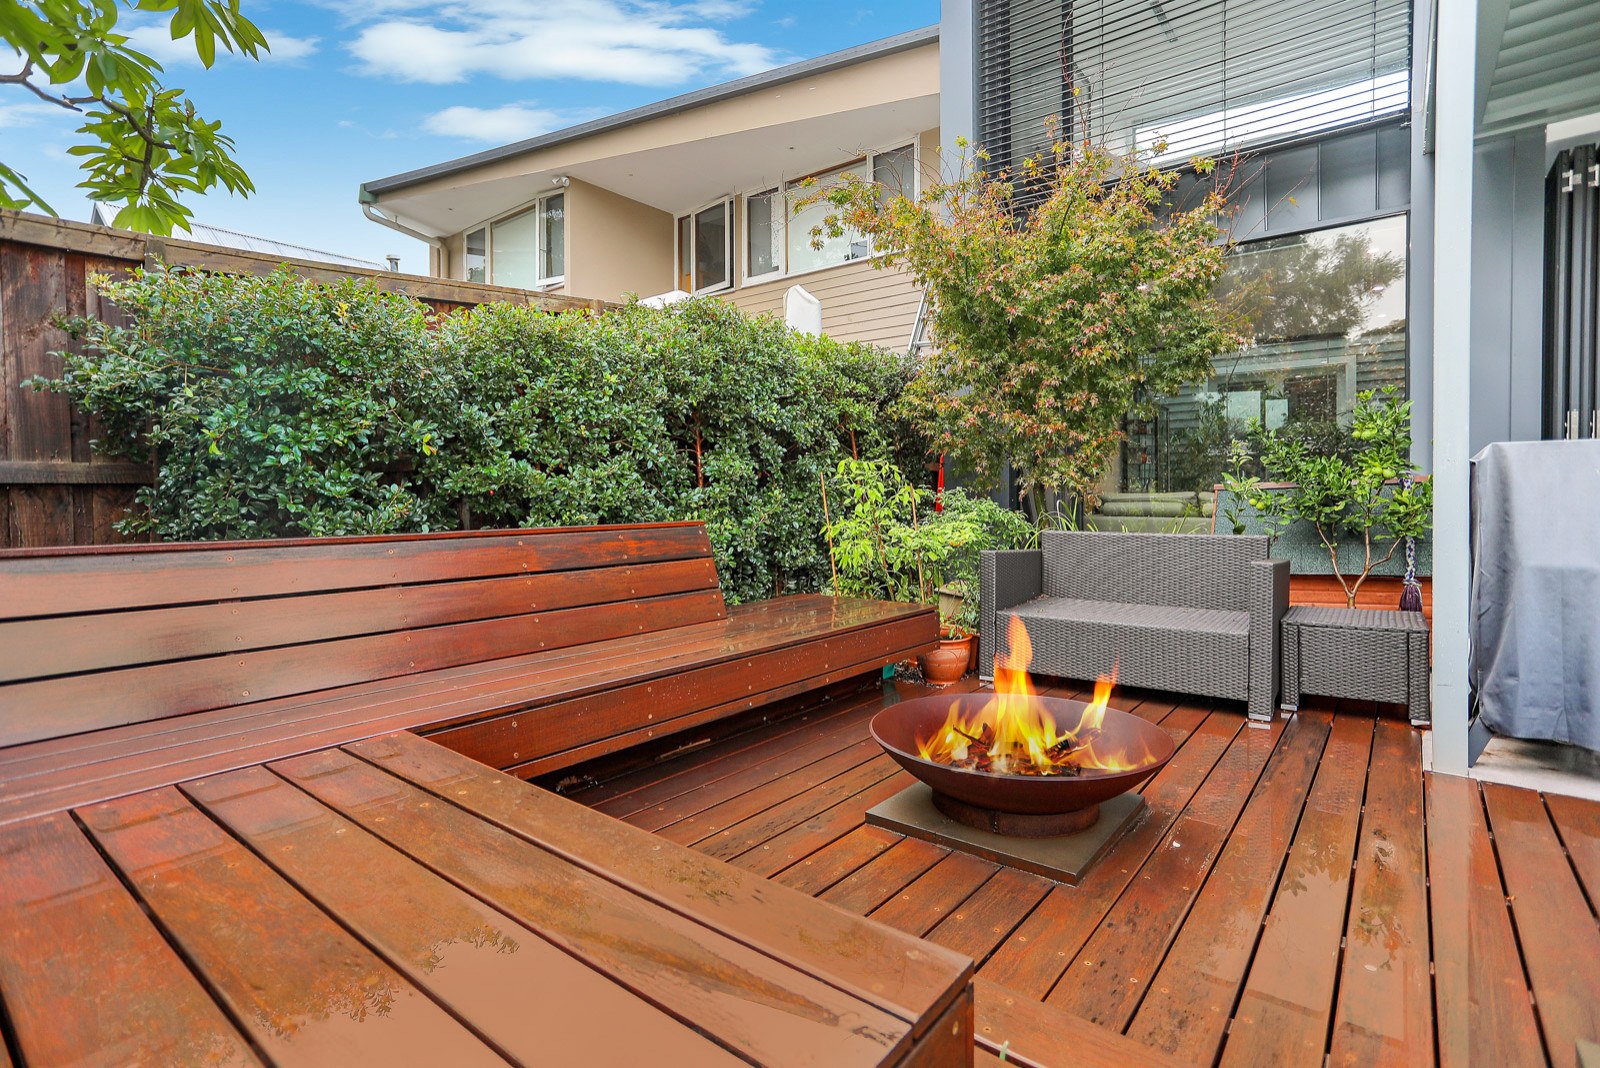 Different Types of Outdoor Decks for Your Home